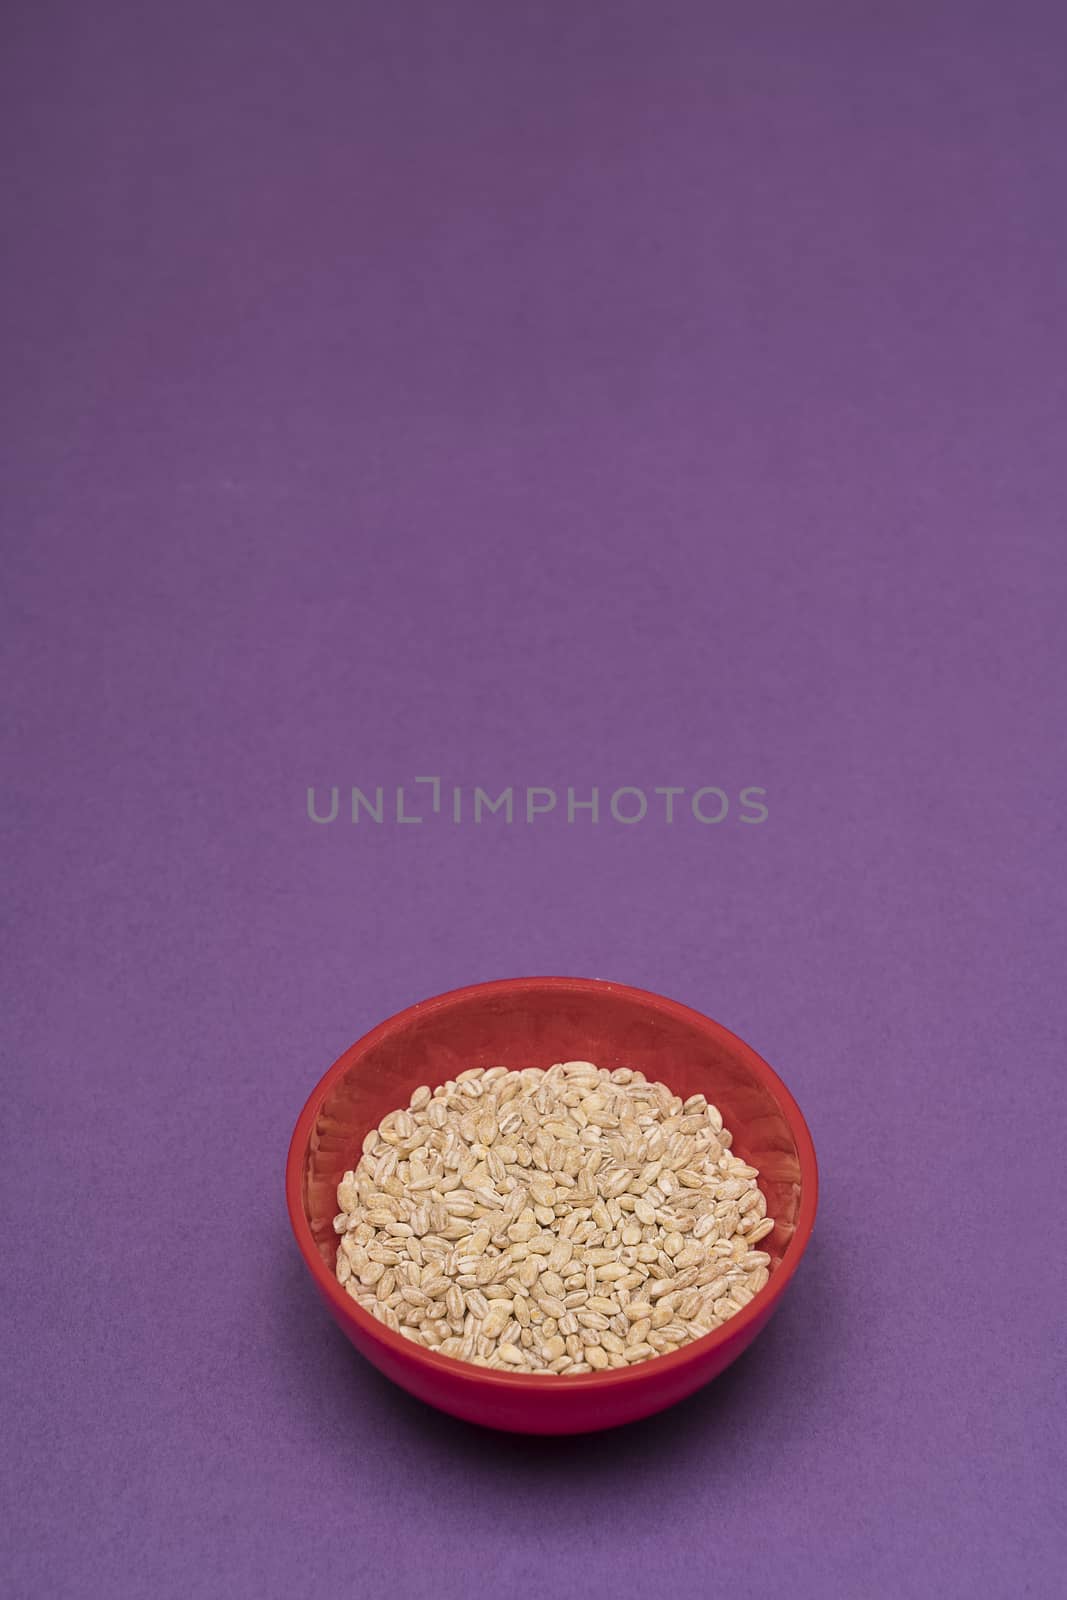 Pearl Barley in a bowl by sergiodv